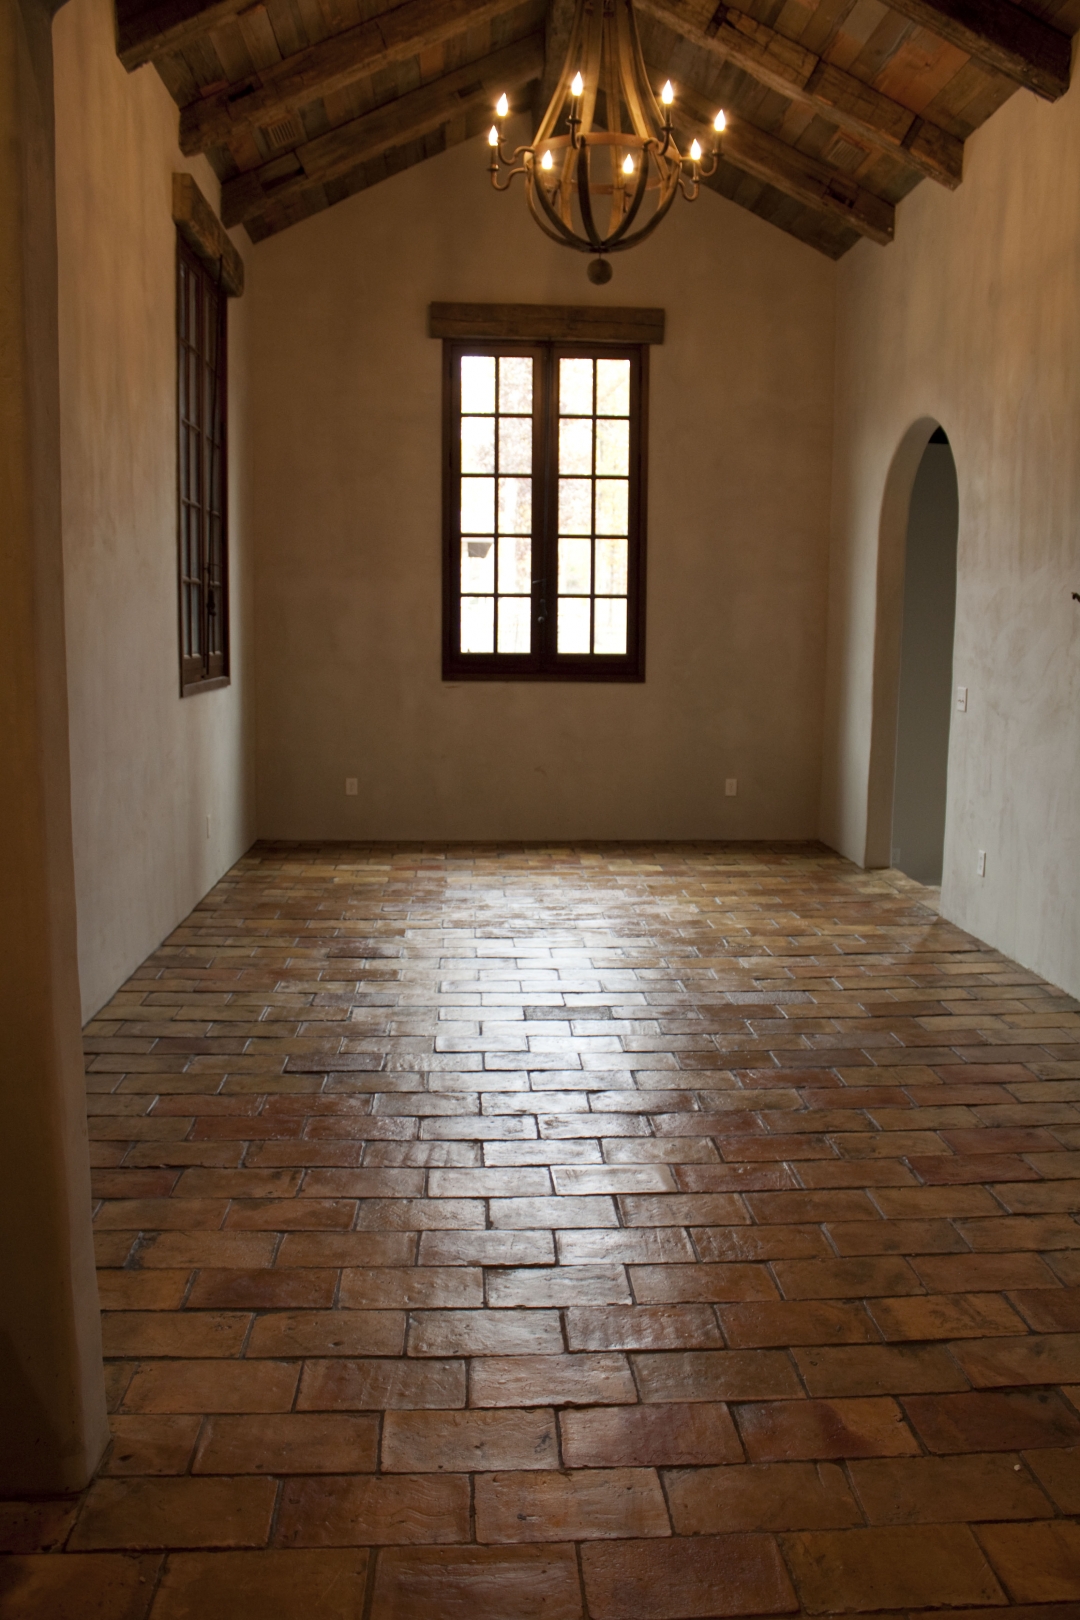 The story of a reclaimed terracotta tile